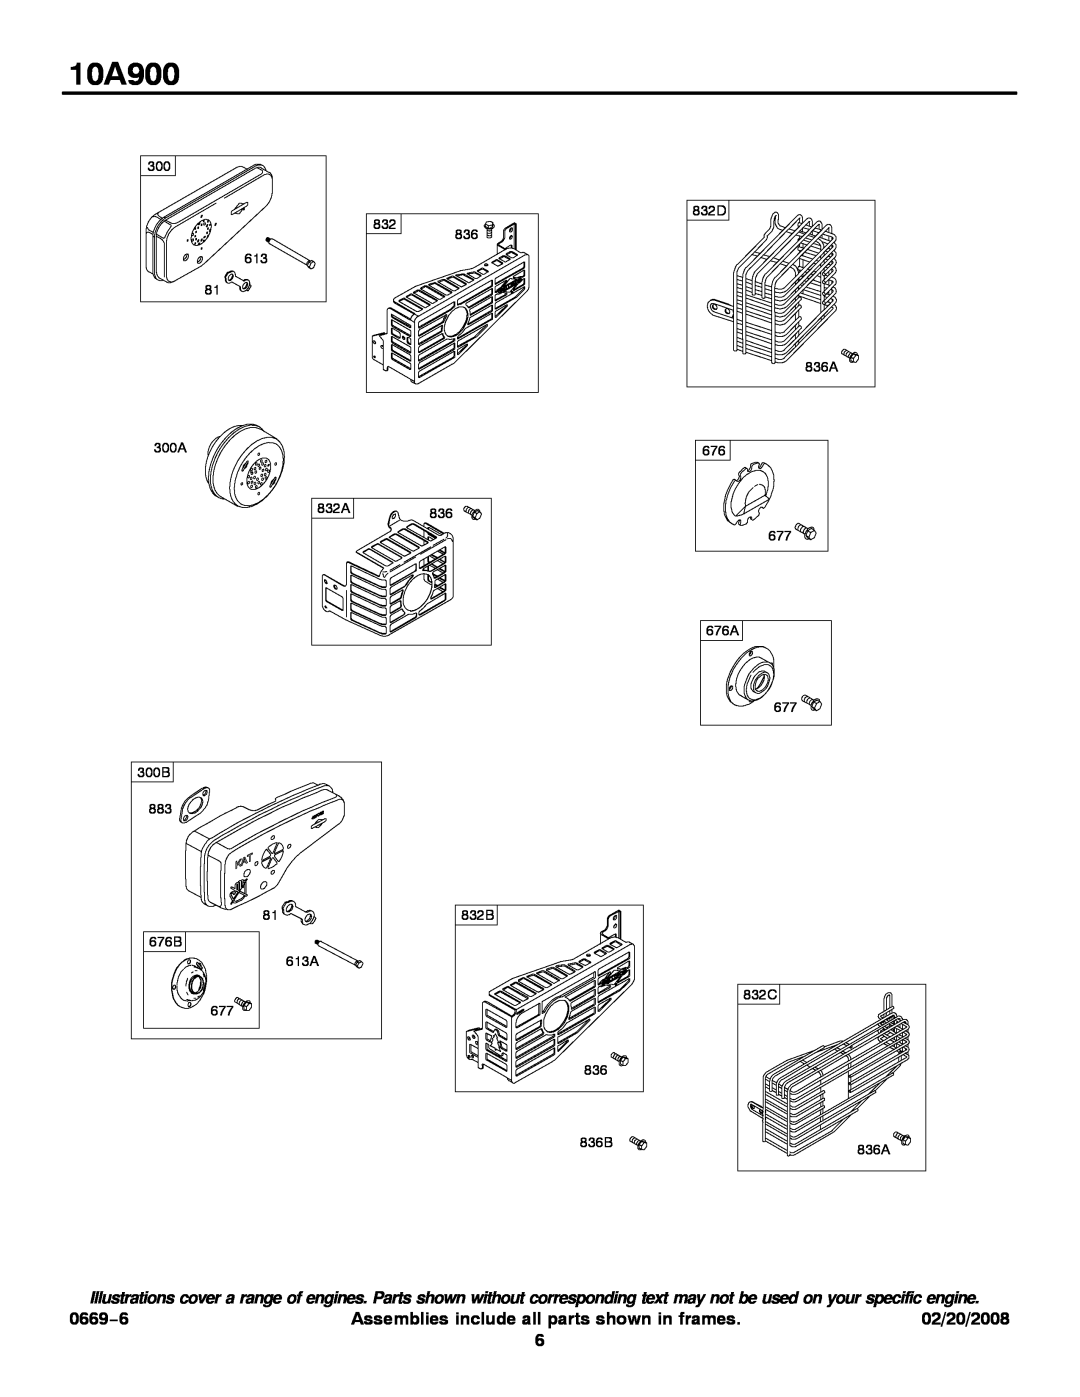 Snapper 10A900 service manual 0669−6, Assemblies include all parts shown in frames, 02/20/2008 